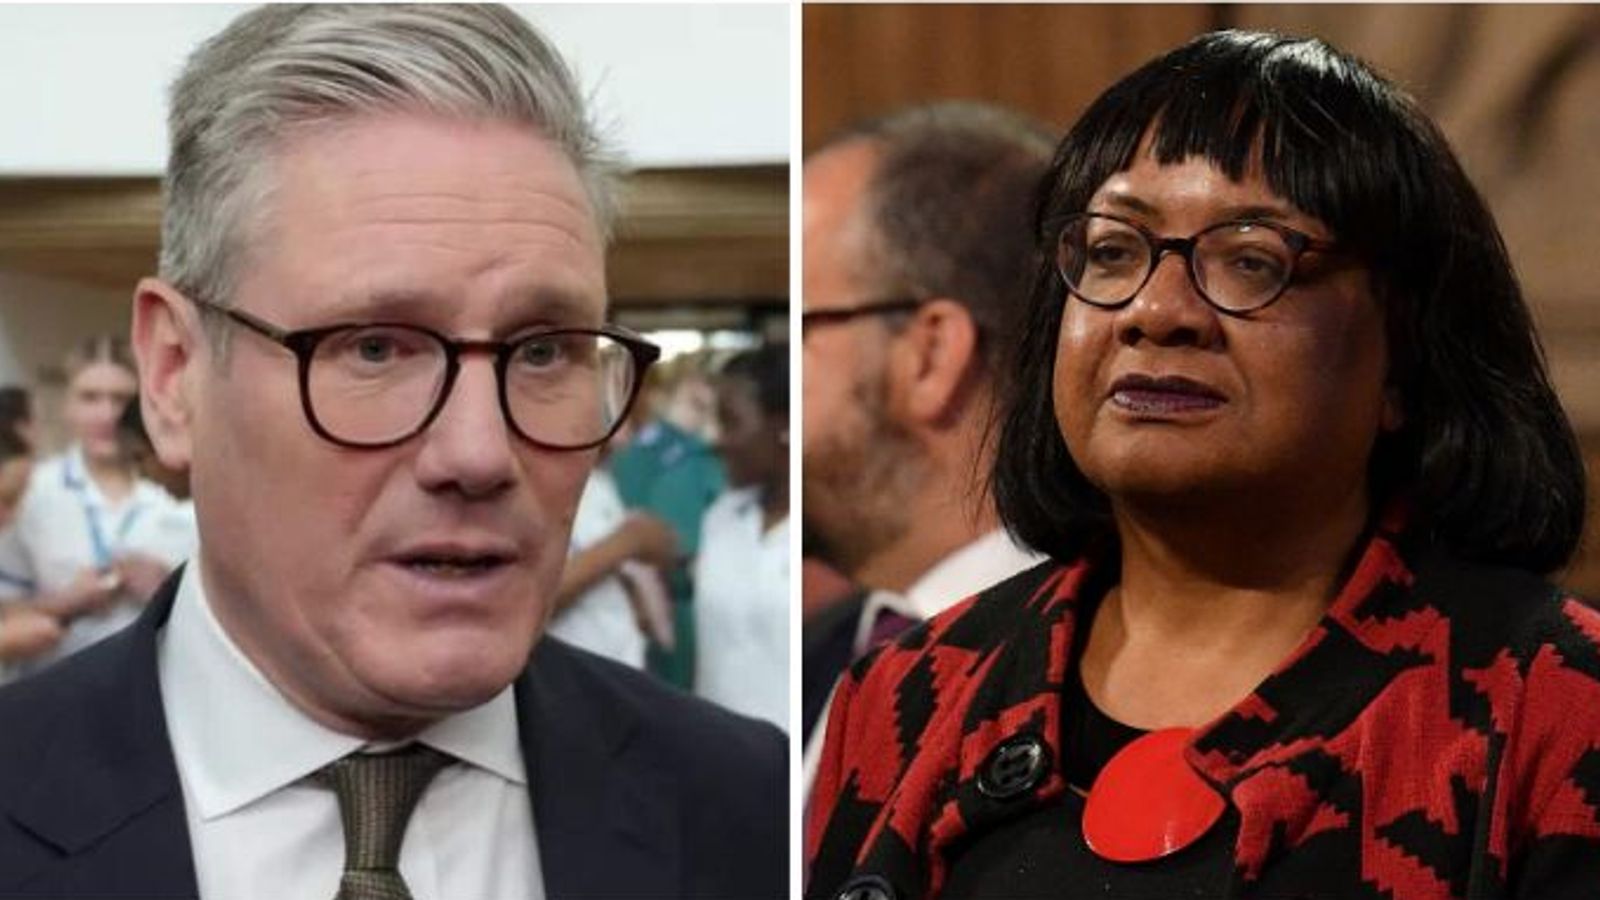 Starmer's decision over Diane Abbott is part of a wider strategy - but polling suggests trouble ahead